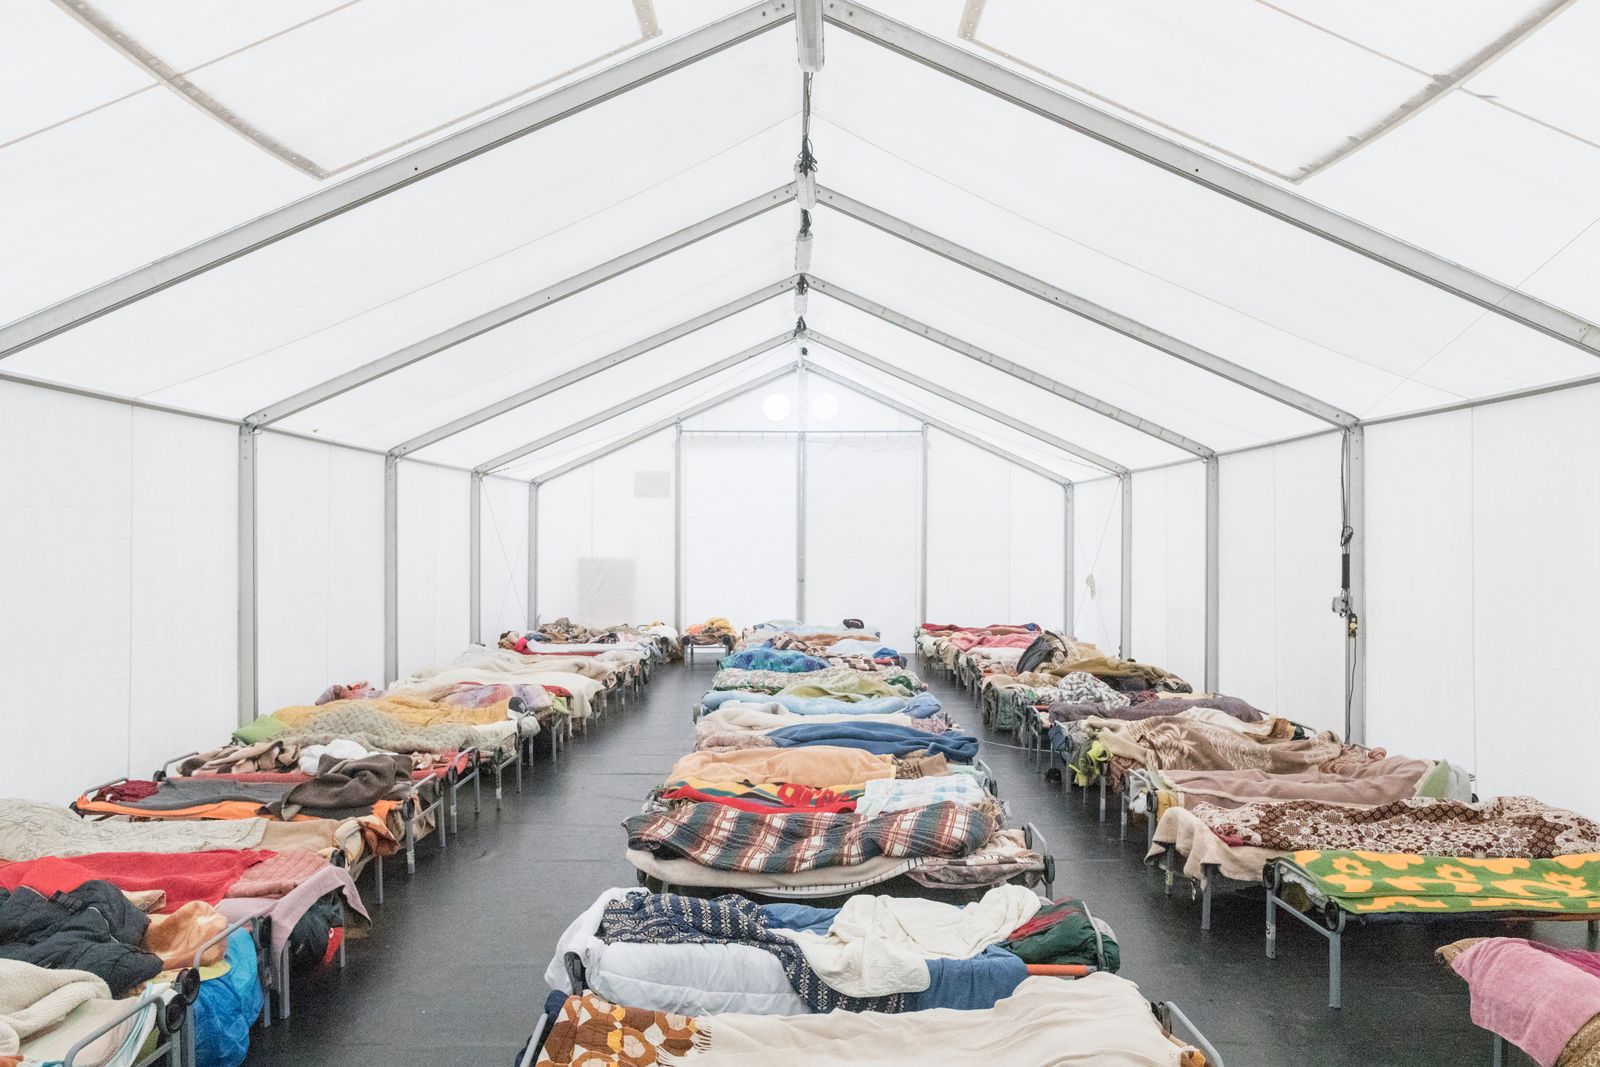 © Manuela Schirra and Fabrizio Giraldi  - 240 square meters and 60 beds. Tent provided by Medecins Sans Frontieres and open from 7 PM to 8 AM.